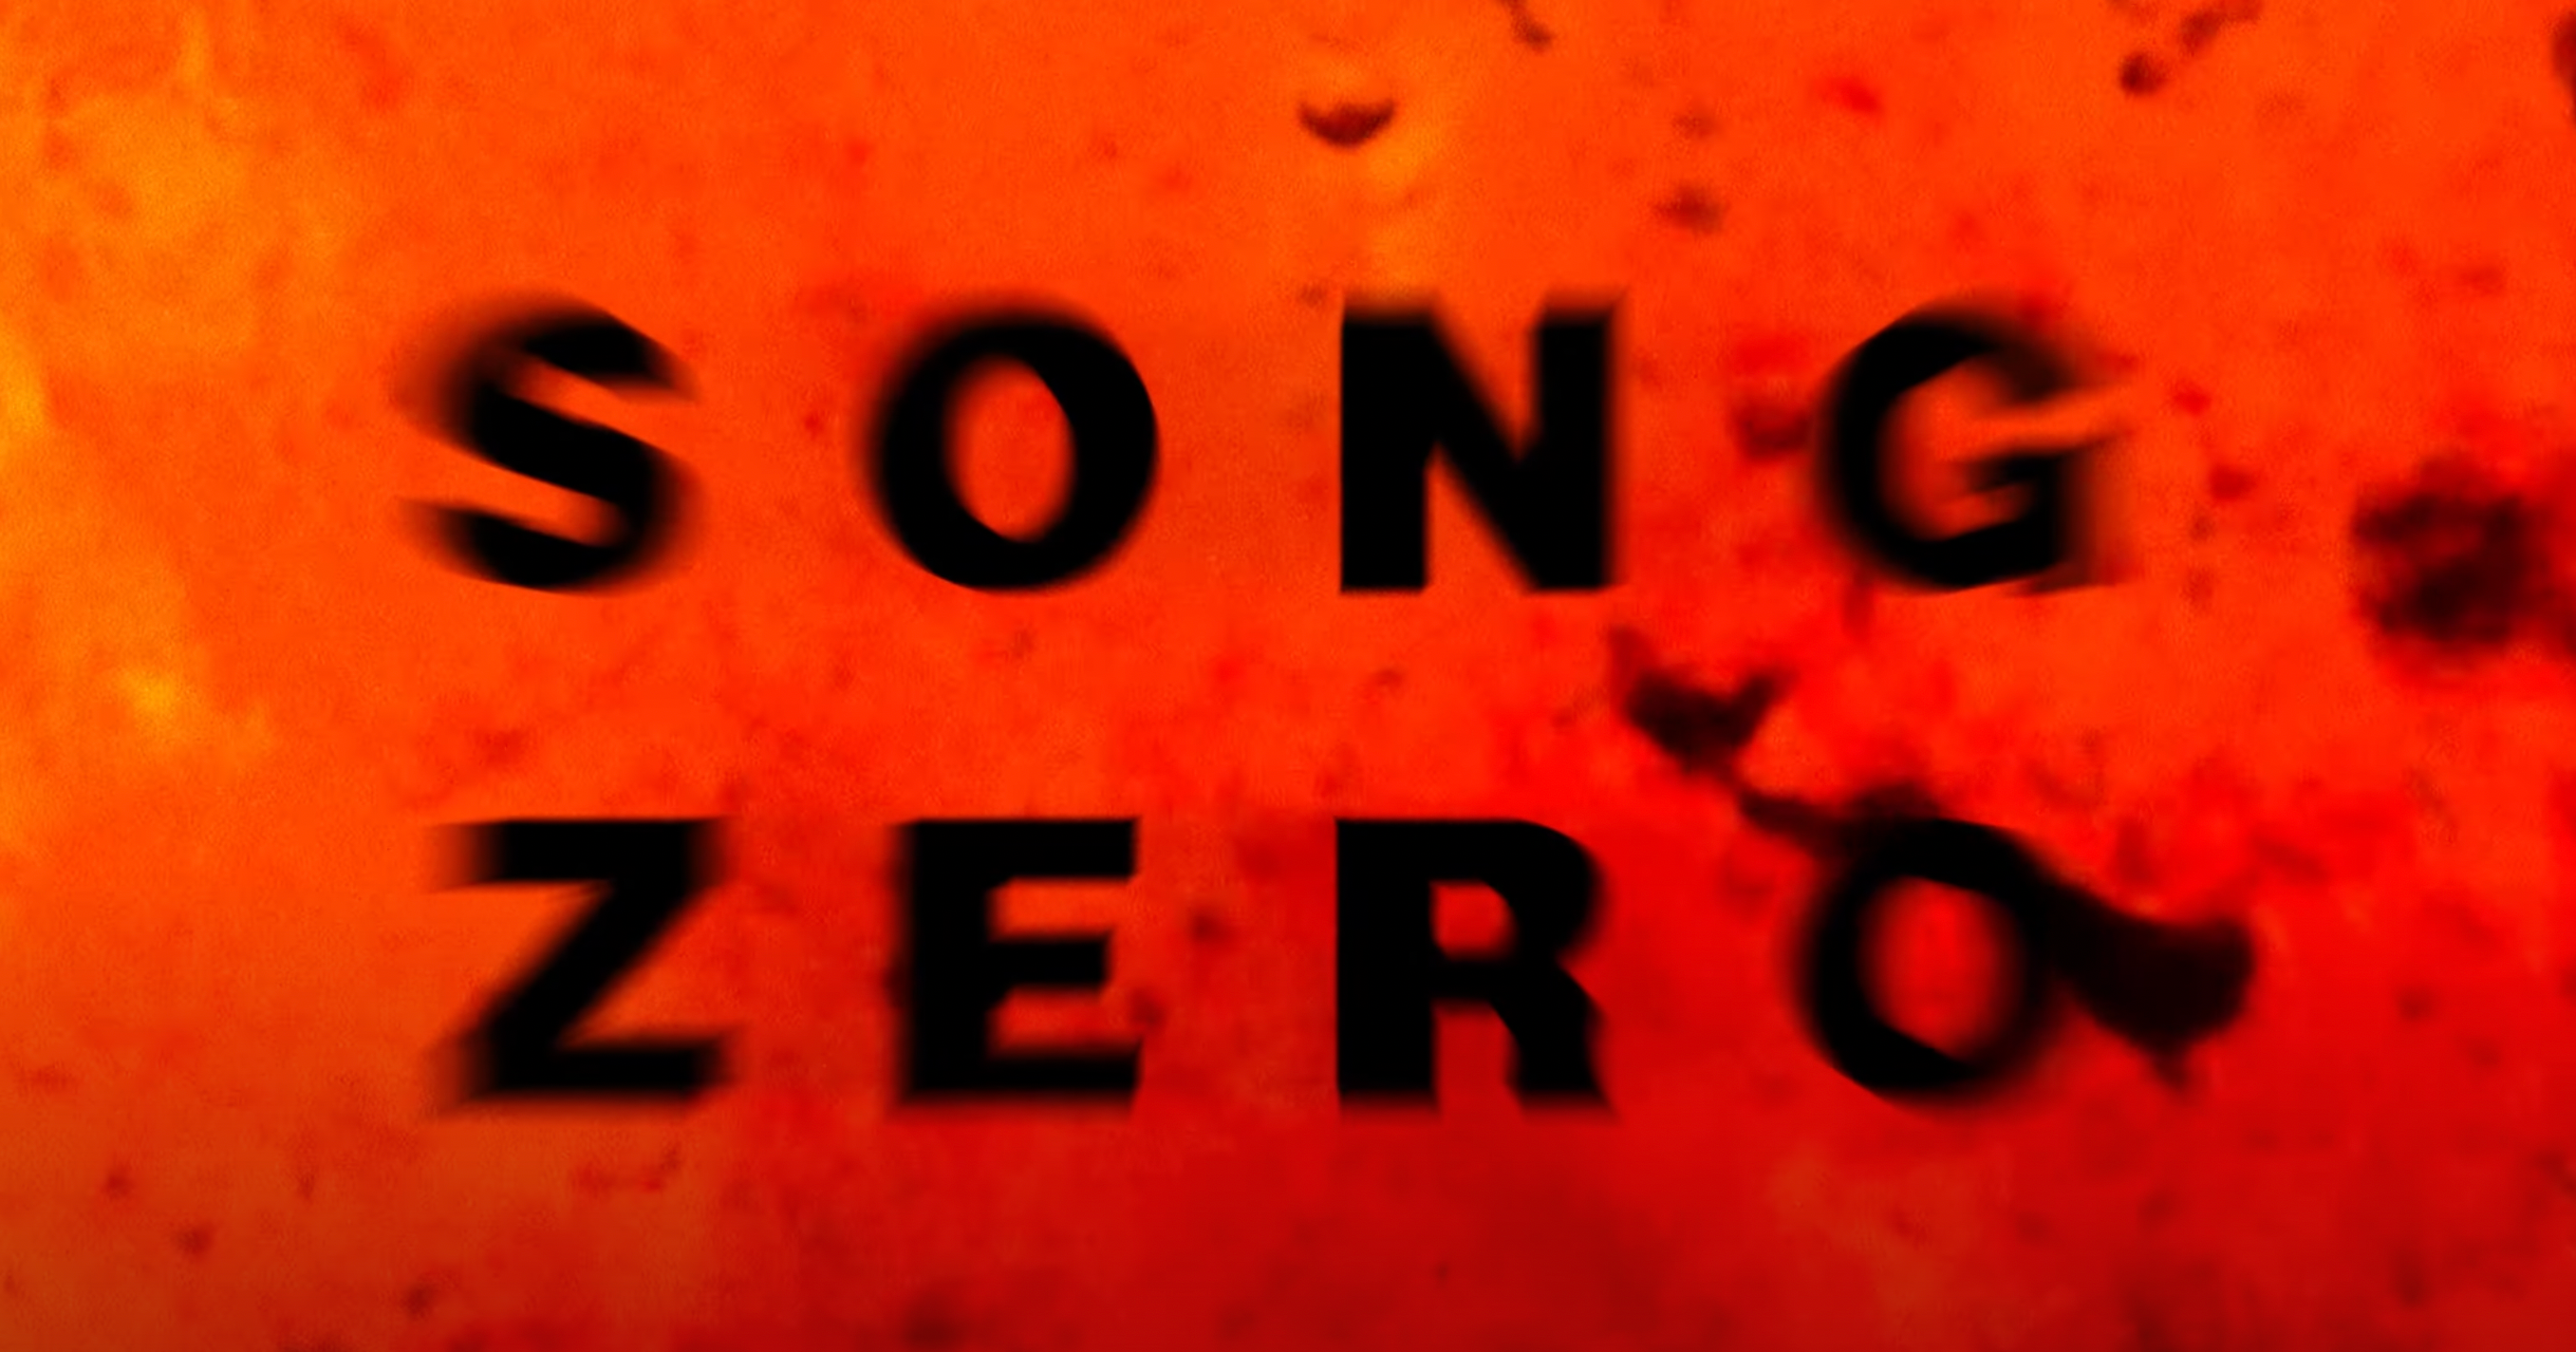 Cover image for Out now: 'Song Zero' from Vaal's forthcoming album. Directed by Constantine // Spence. Mixed and mastered at Hidden Mountain.